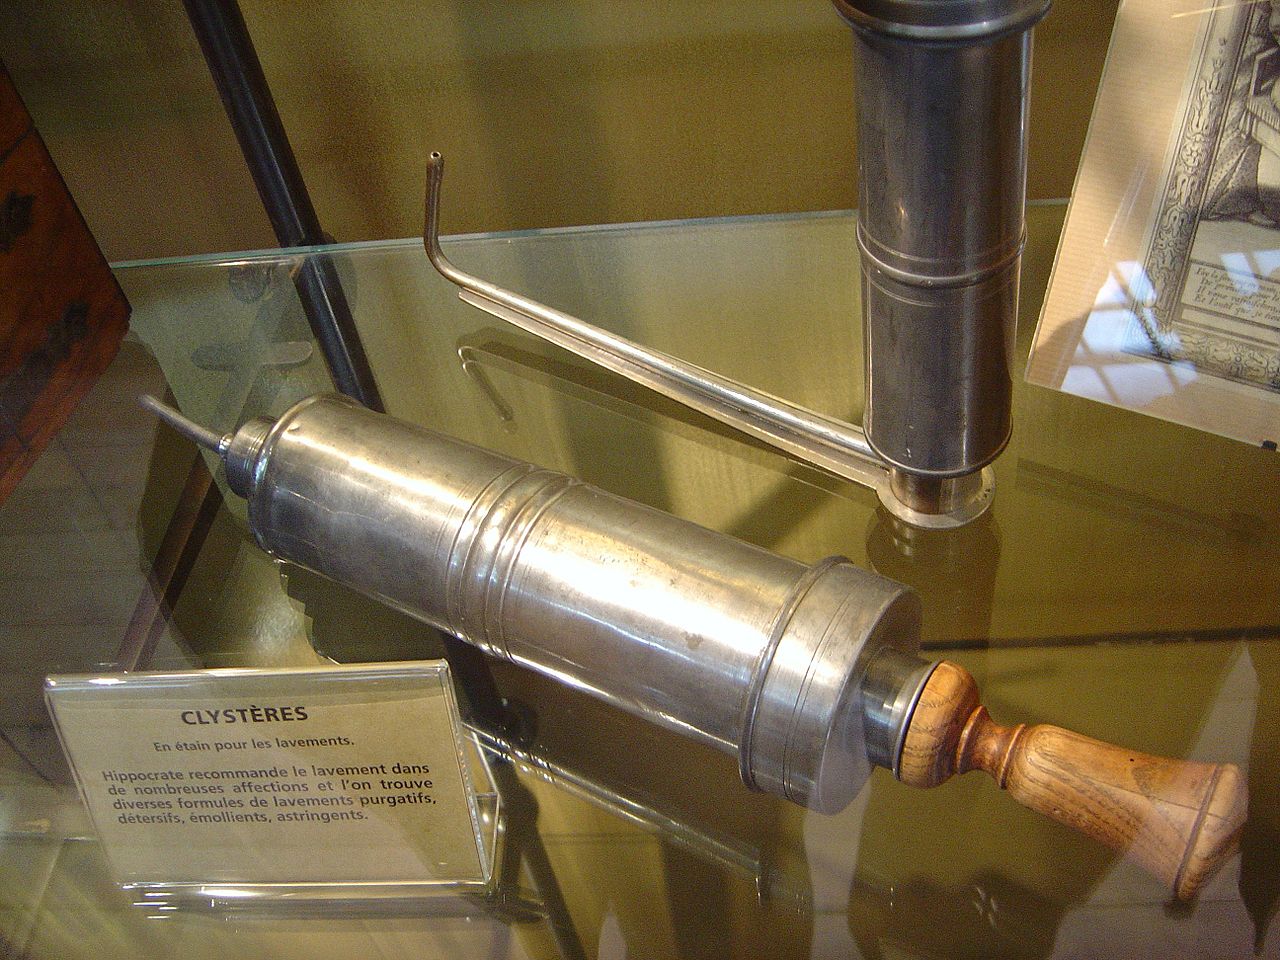 Clyster Syringes: In Medieval times these were used to perform enemas. The long metal tube was filled with a medicinal liquid, which was injected into the rectum through the anus. The procedure was called "enema," and it was for the treatment of constipation or bowel cleansing. Thank goodness horrific procedures like this ended with the medieval era.